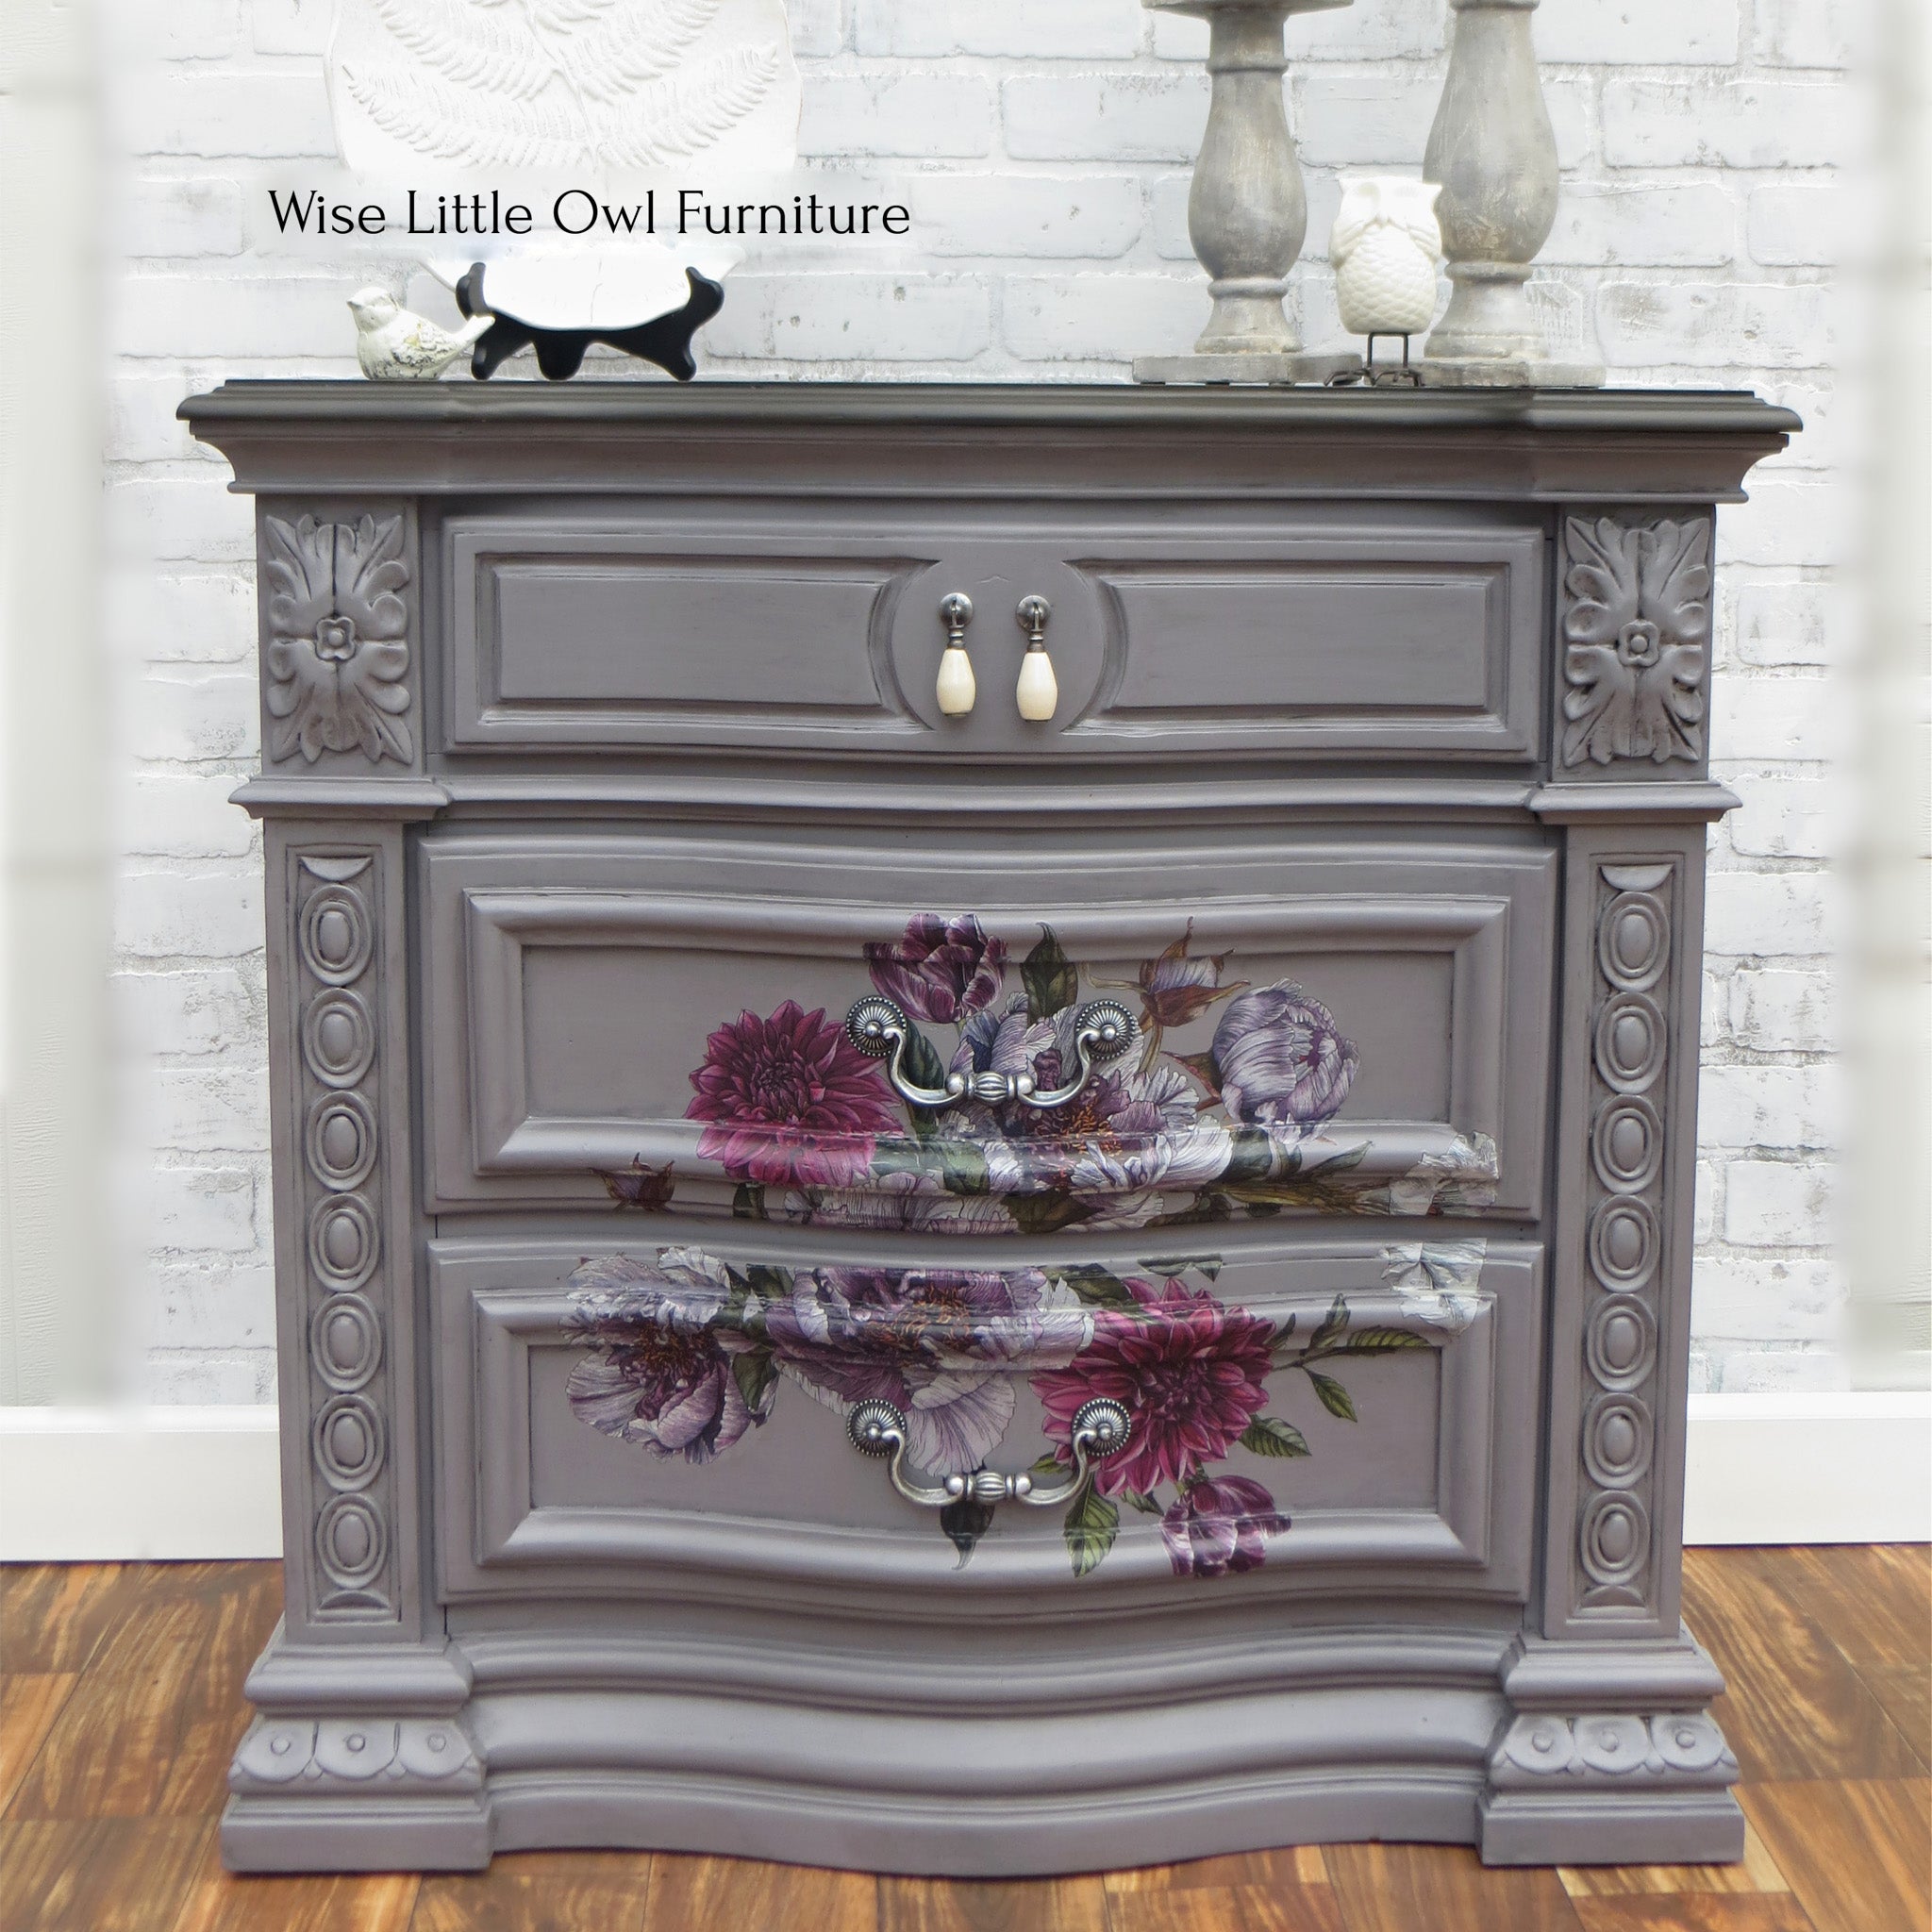 A vintage 3-drawer nightstand refurbished by Wise Little Owl Furniture is painted in Dixie Belle's Mason Dixon chalk mineral paint and has a maroon and lavender floral transfer on the bottom 2 drawers.